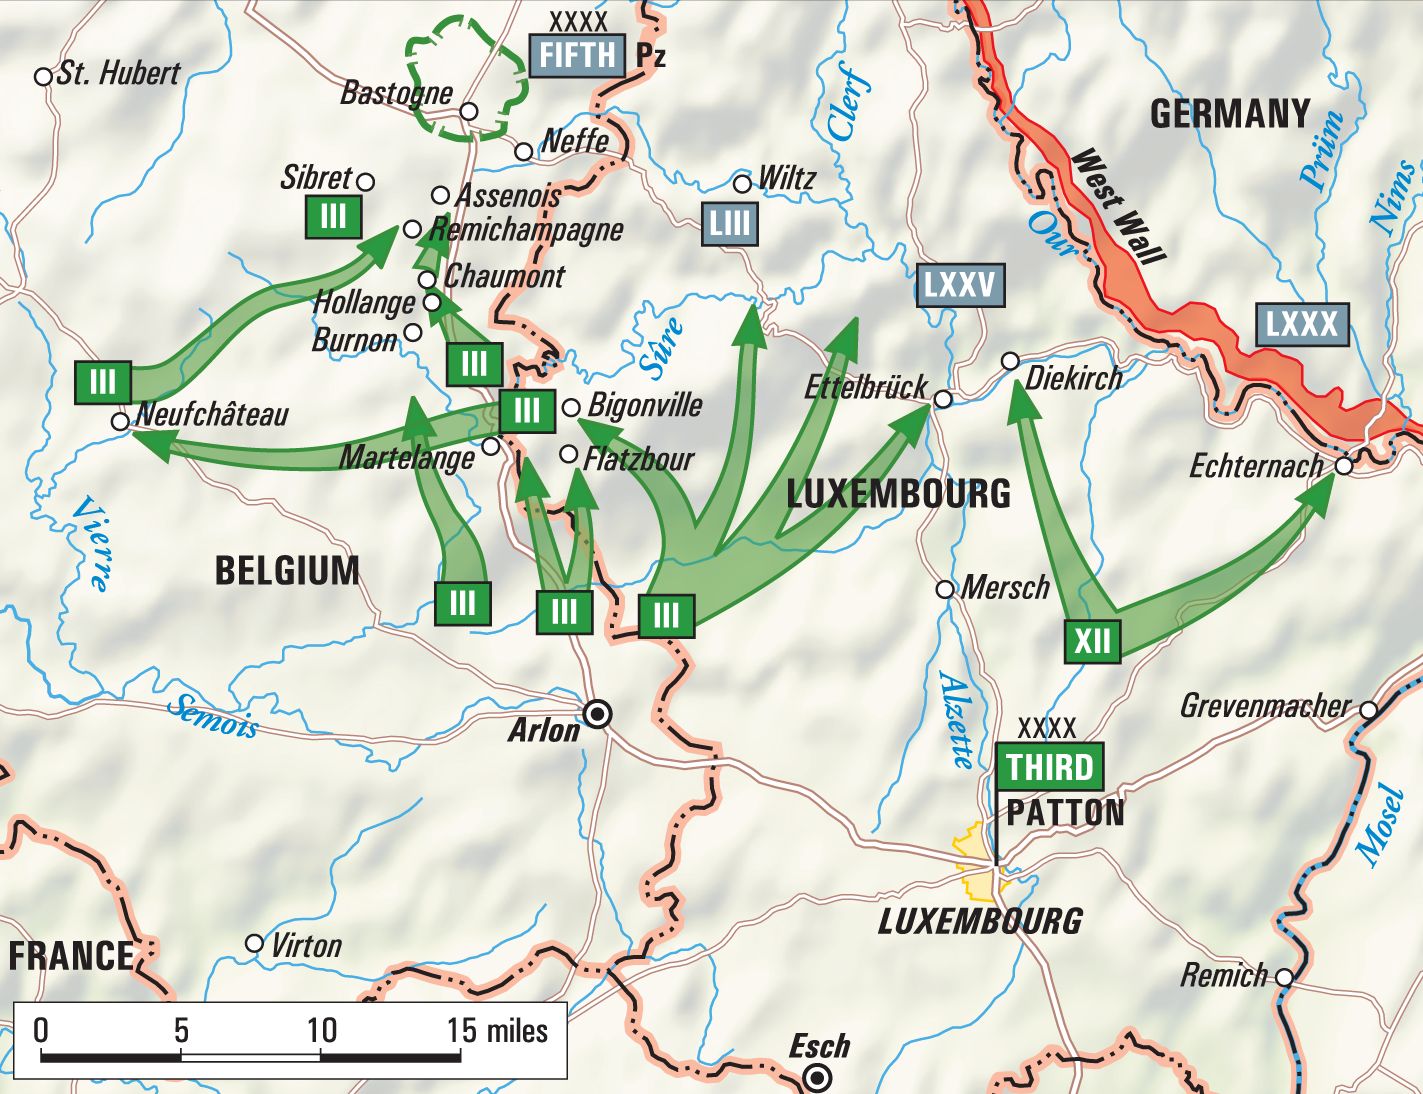 The dispositions of German troops and armor surrounding Bastogne were assaulted by General George Patton’s Third Army thrust to relieve the 101st Airborne Division and elements of the 10th Armored Division inside the besieged town. 